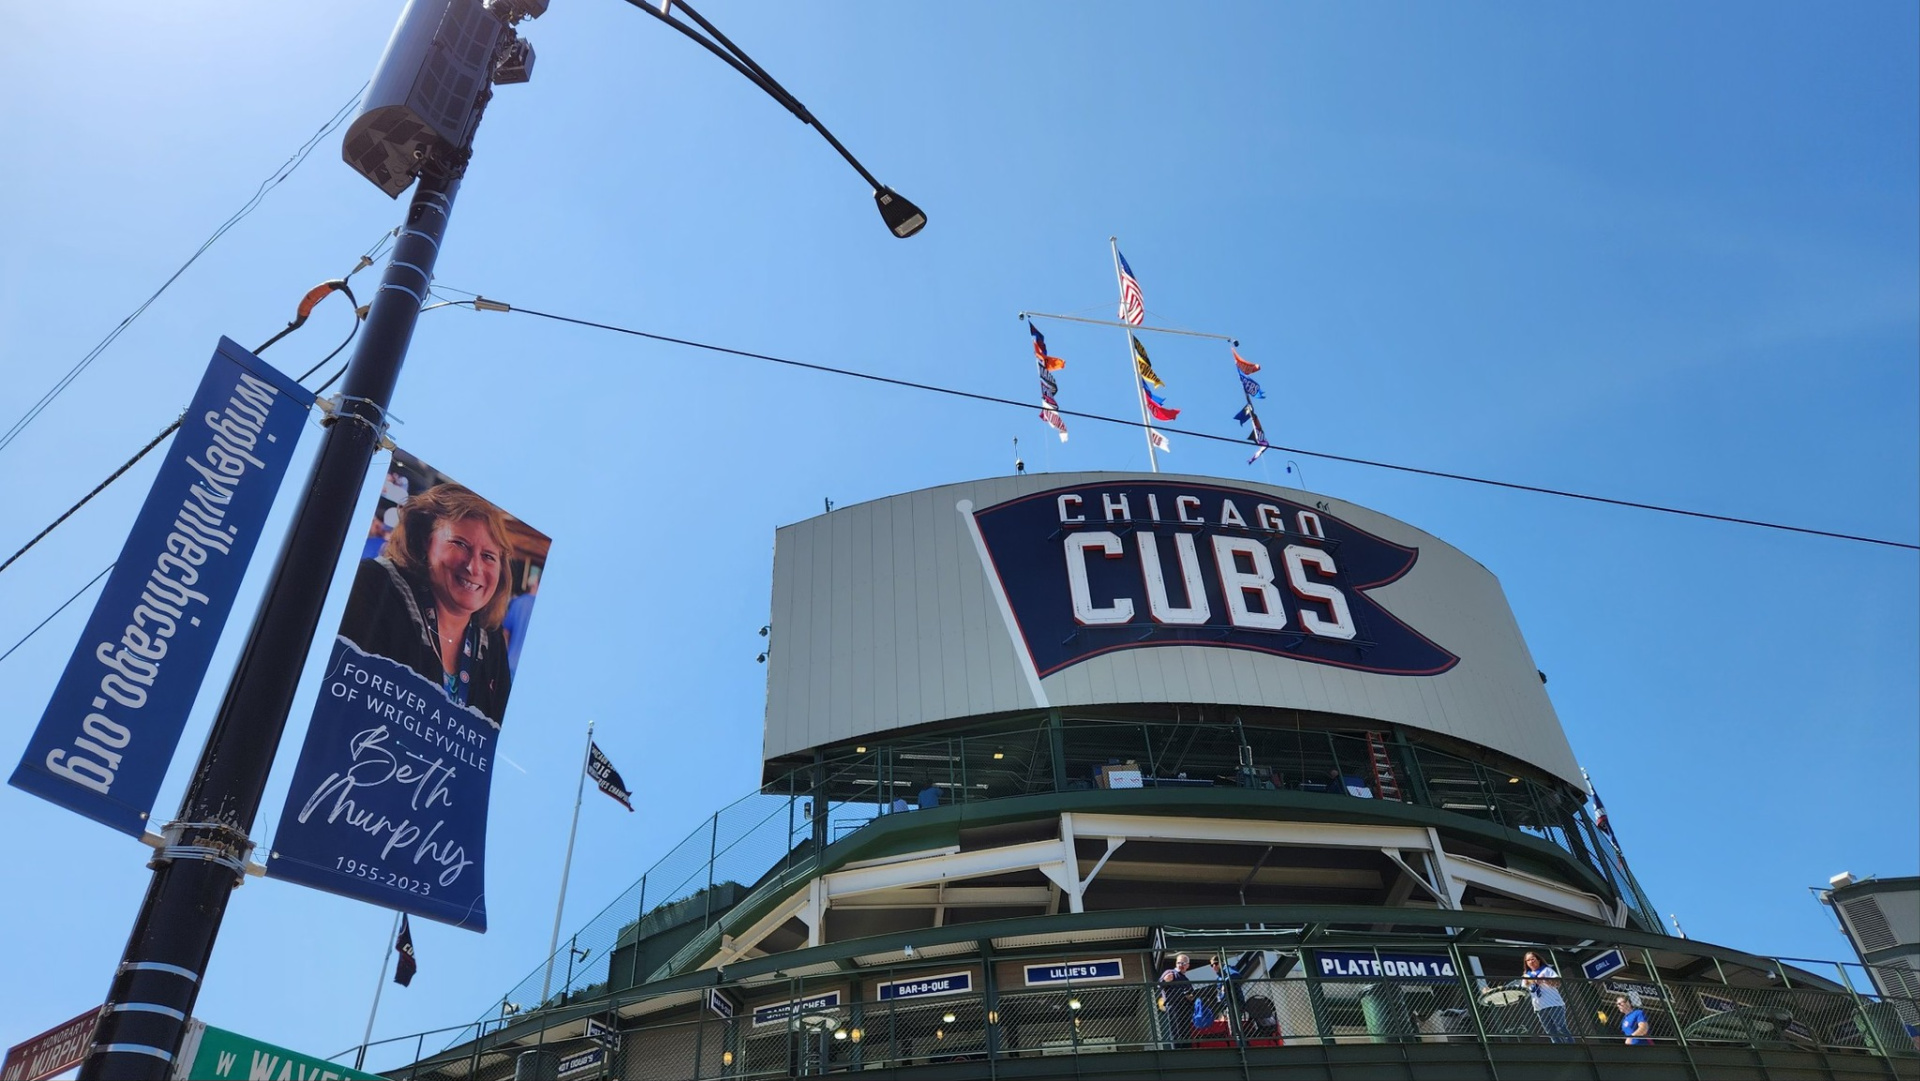 Step Inside: Wrigley Field - Home of the Chicago Cubs